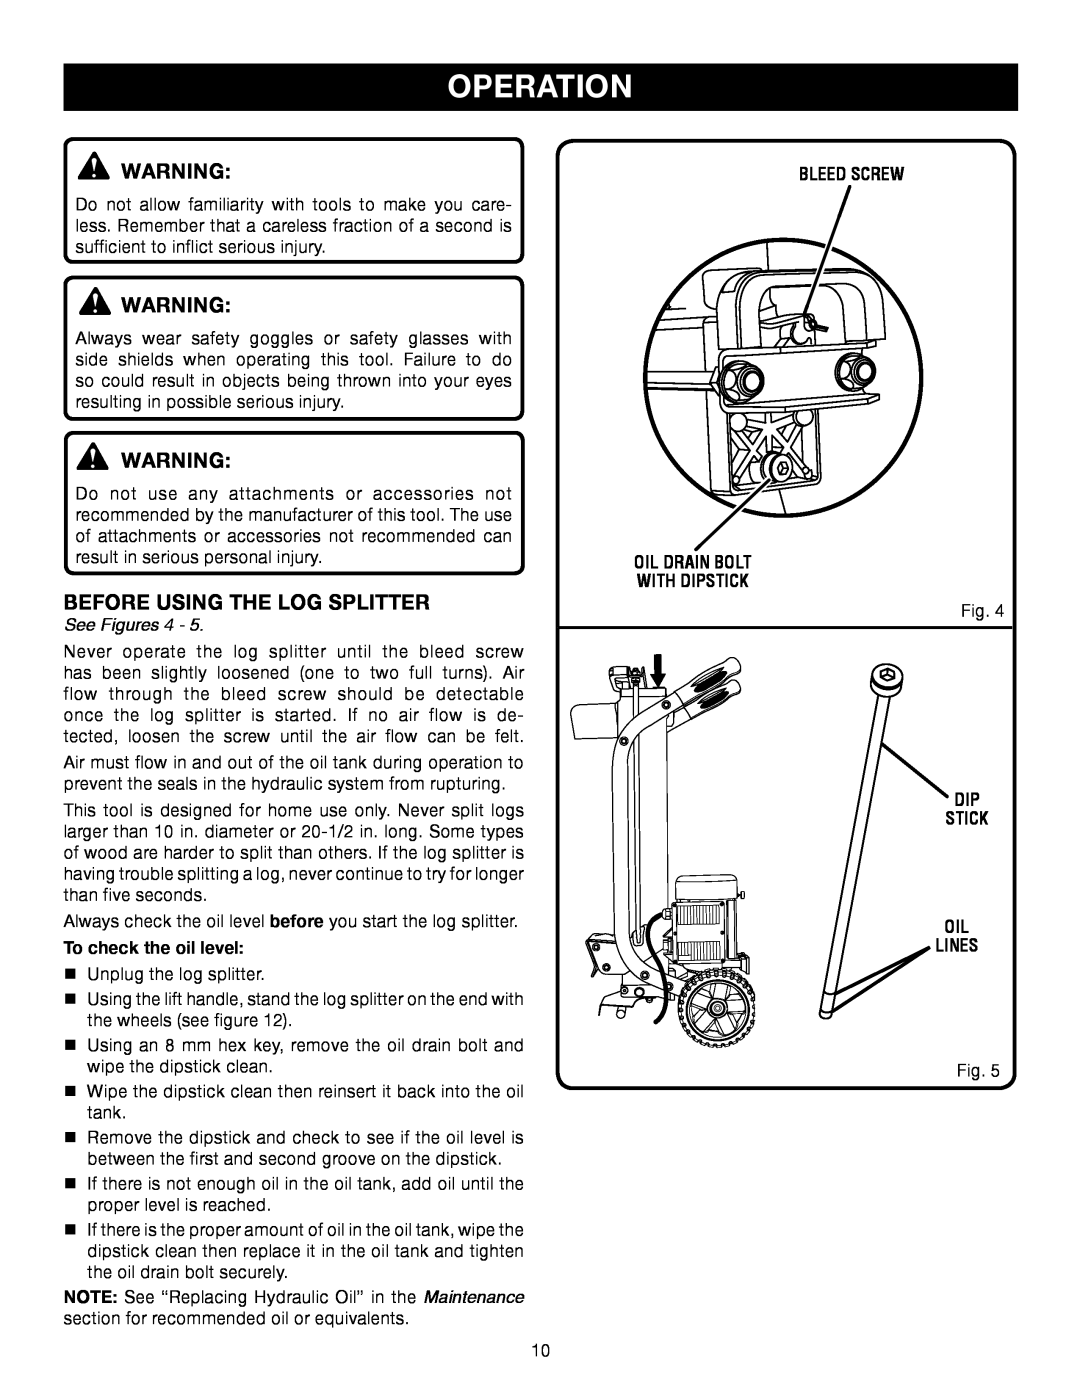 Ryobi Outdoor RY49701 manual Operation, Before Using The Log Splitter, See Figures 